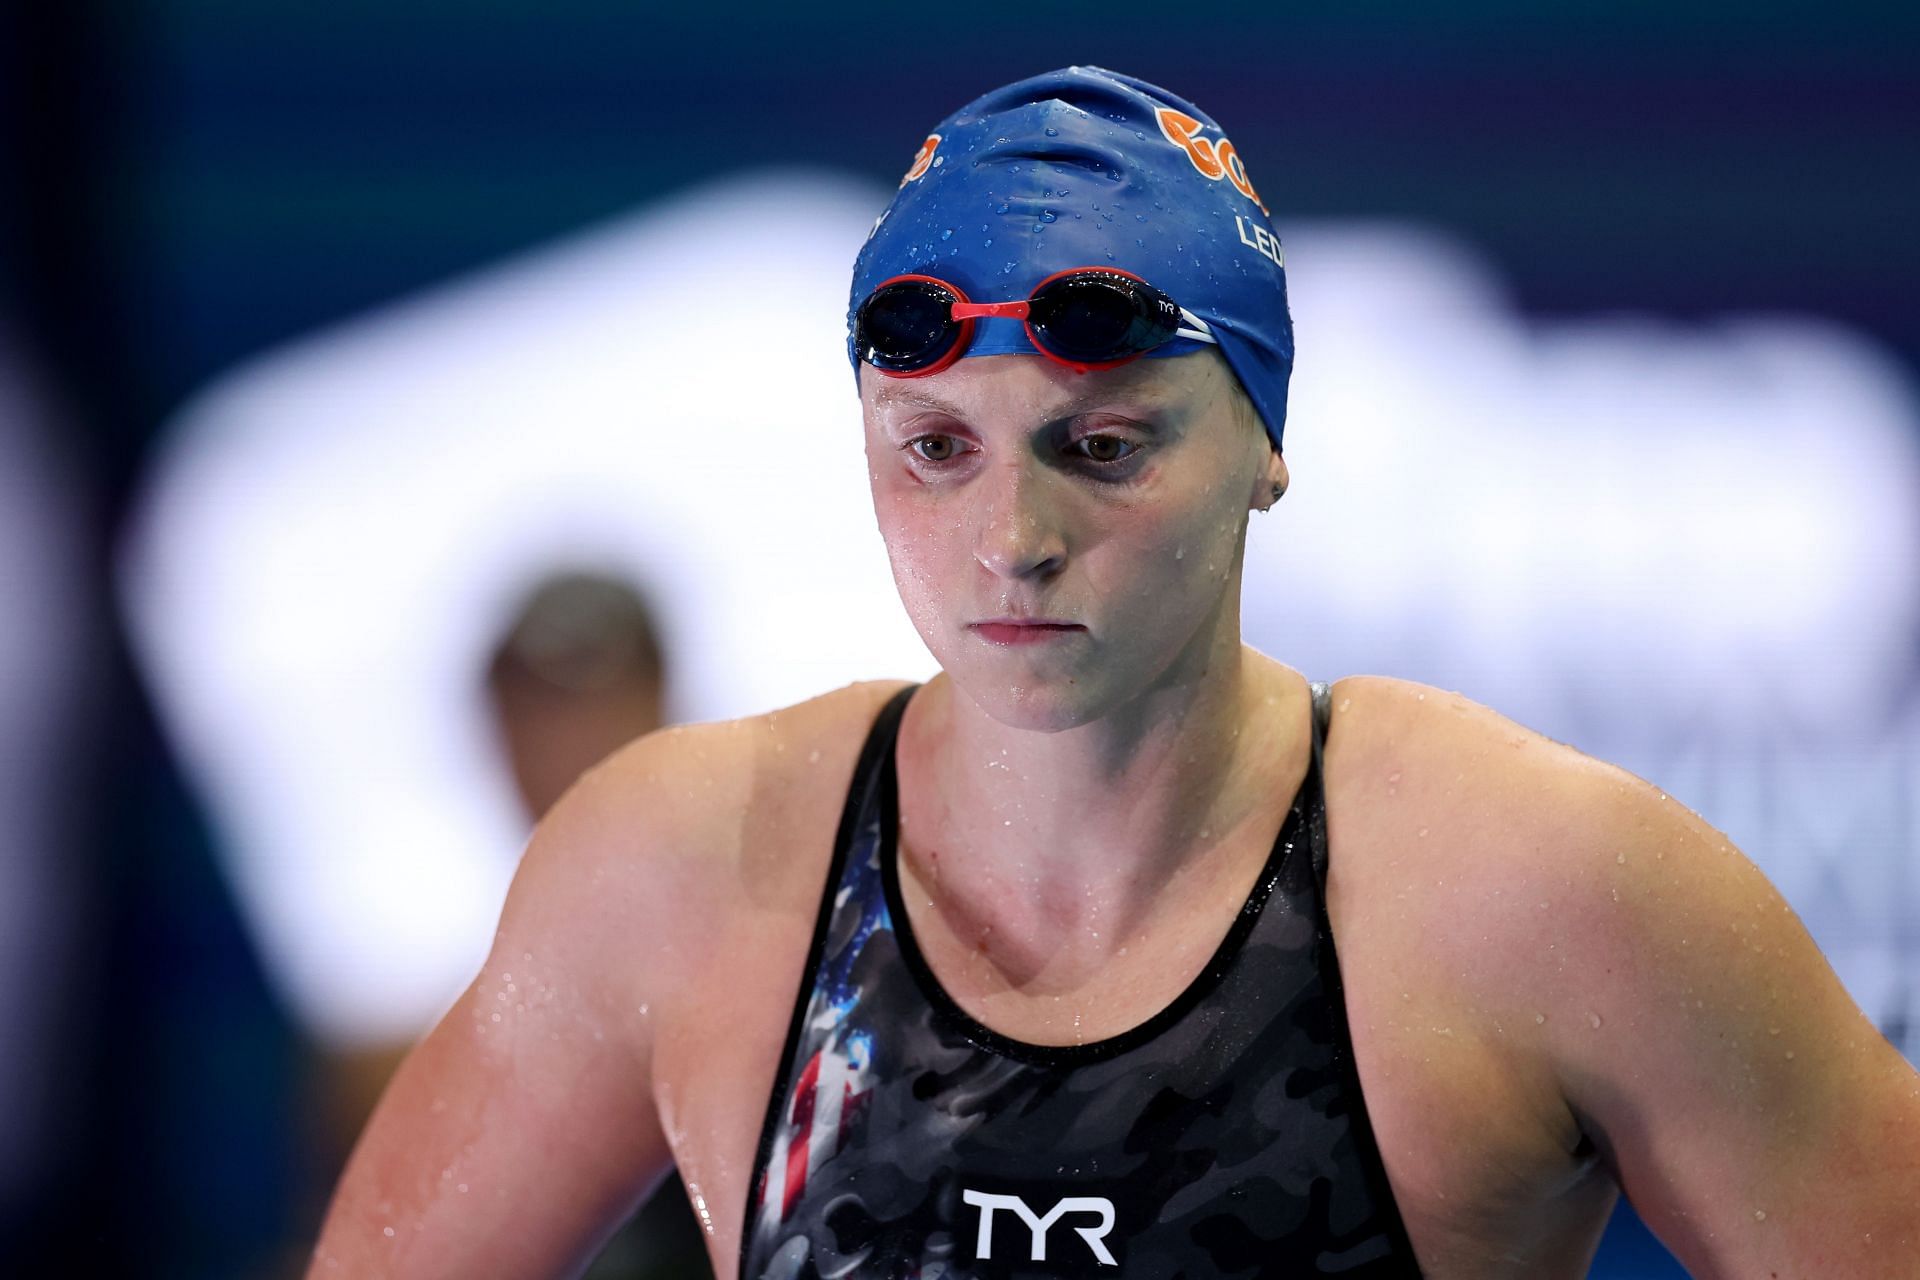 Katie Ledecky of the United States looks on after breaking the world record in the Women&#039;s 800m Freestyle final on Day 3 of the FINA Swimming World Cup 2022 Leg 3 at Indiana University Natatorium on November 05, 2022 in Indianapolis, Indiana. (Photo by Maddie Meyer/Getty Images)